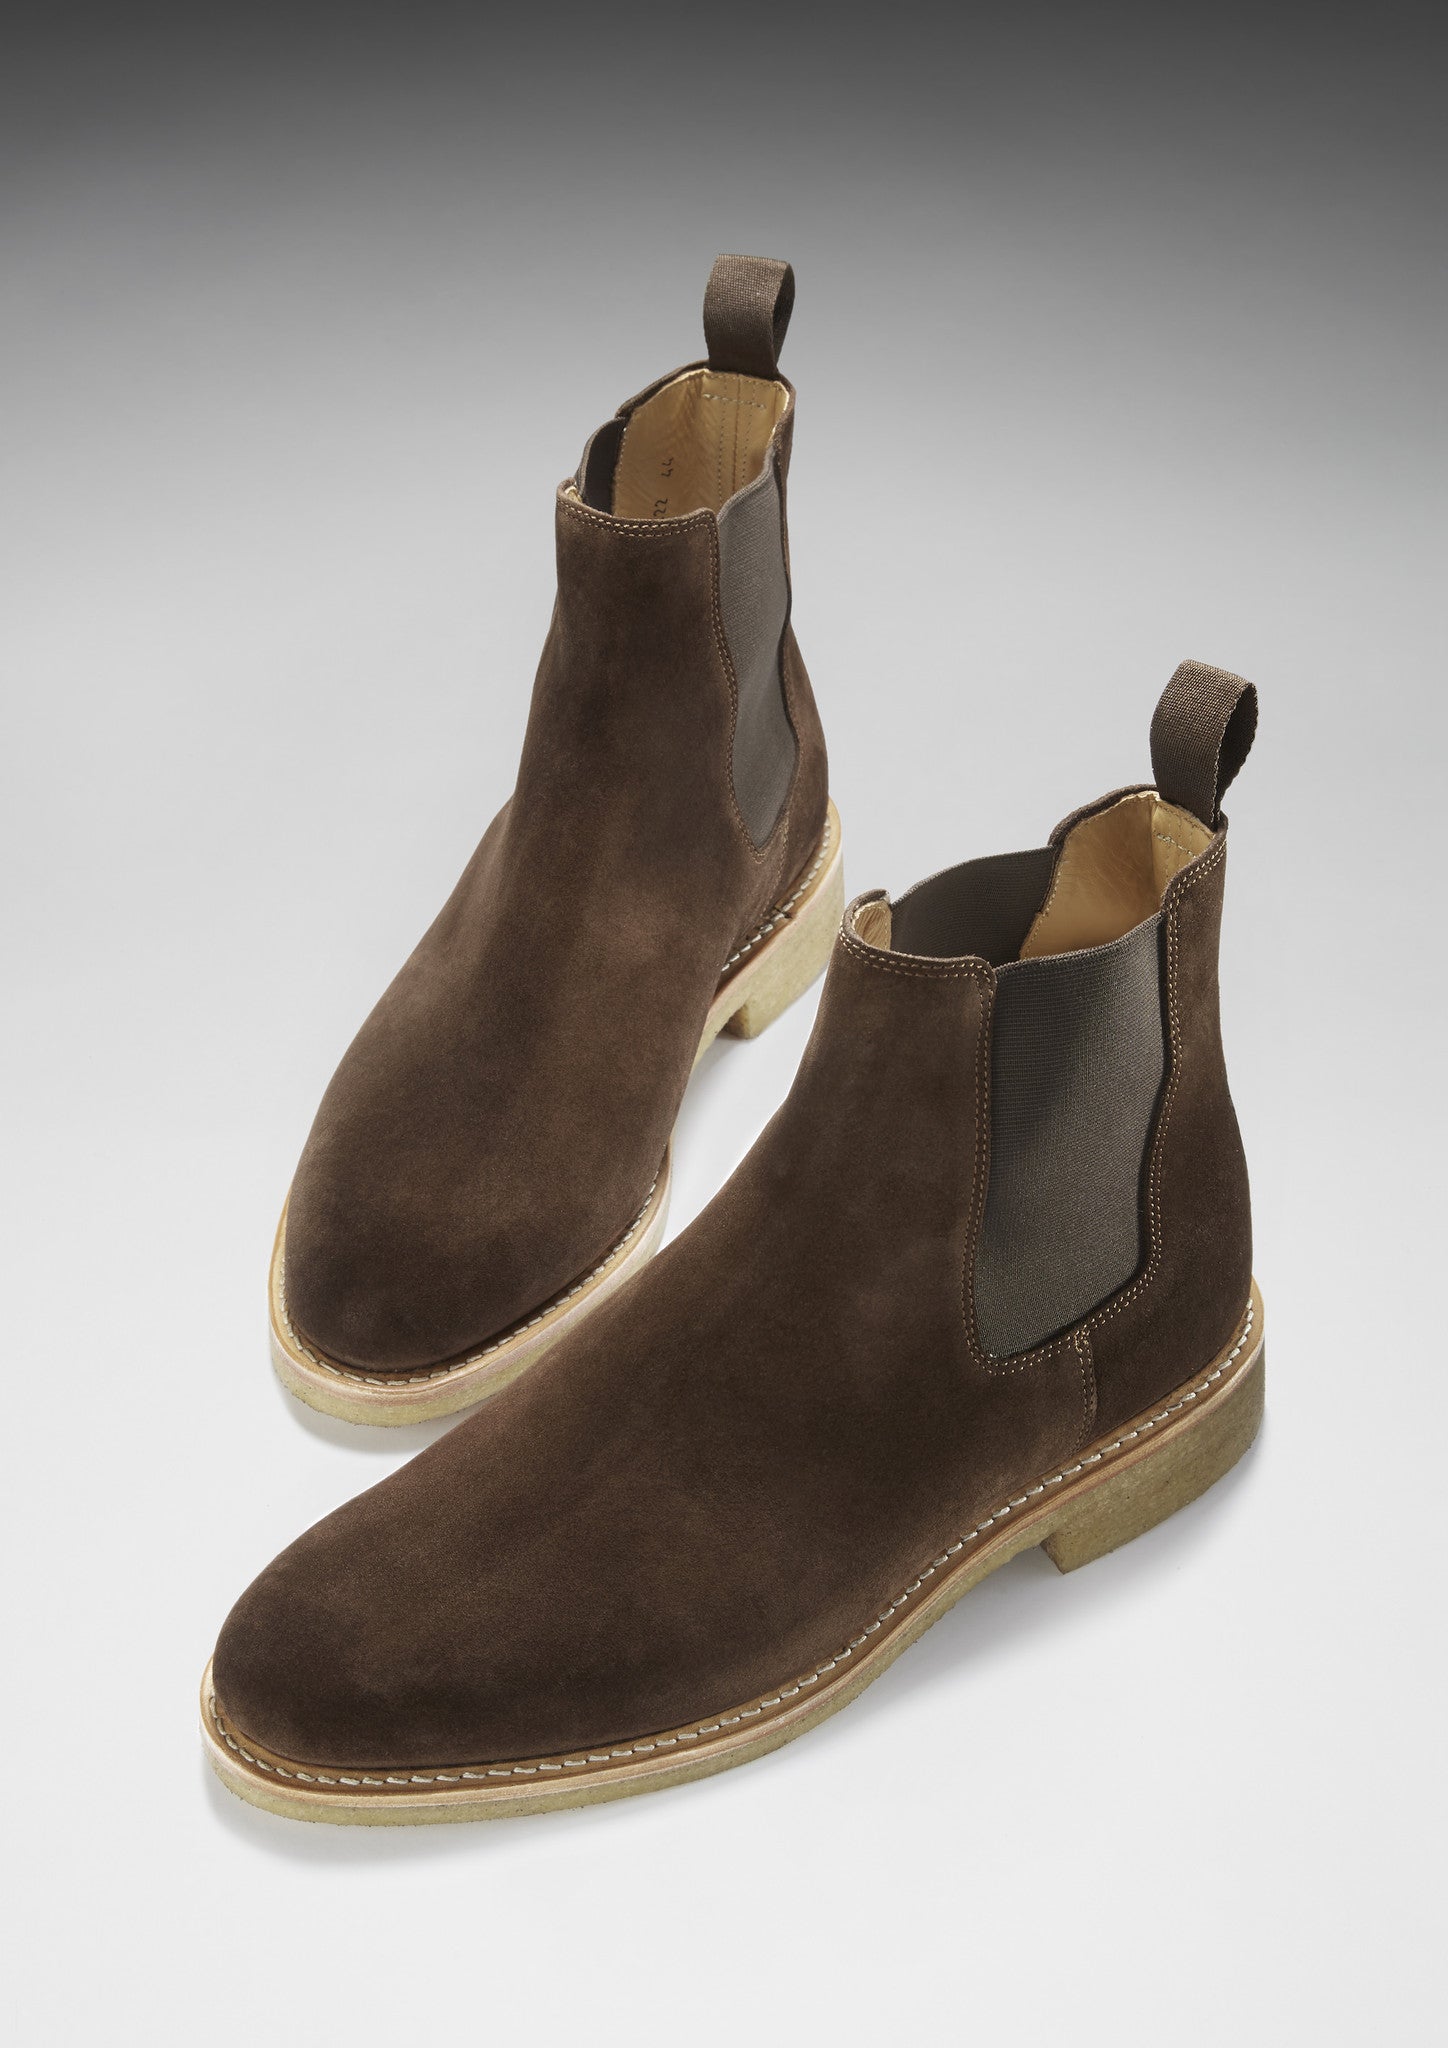 Chelsea Boots Brown Suede Crepe Rubber Sole